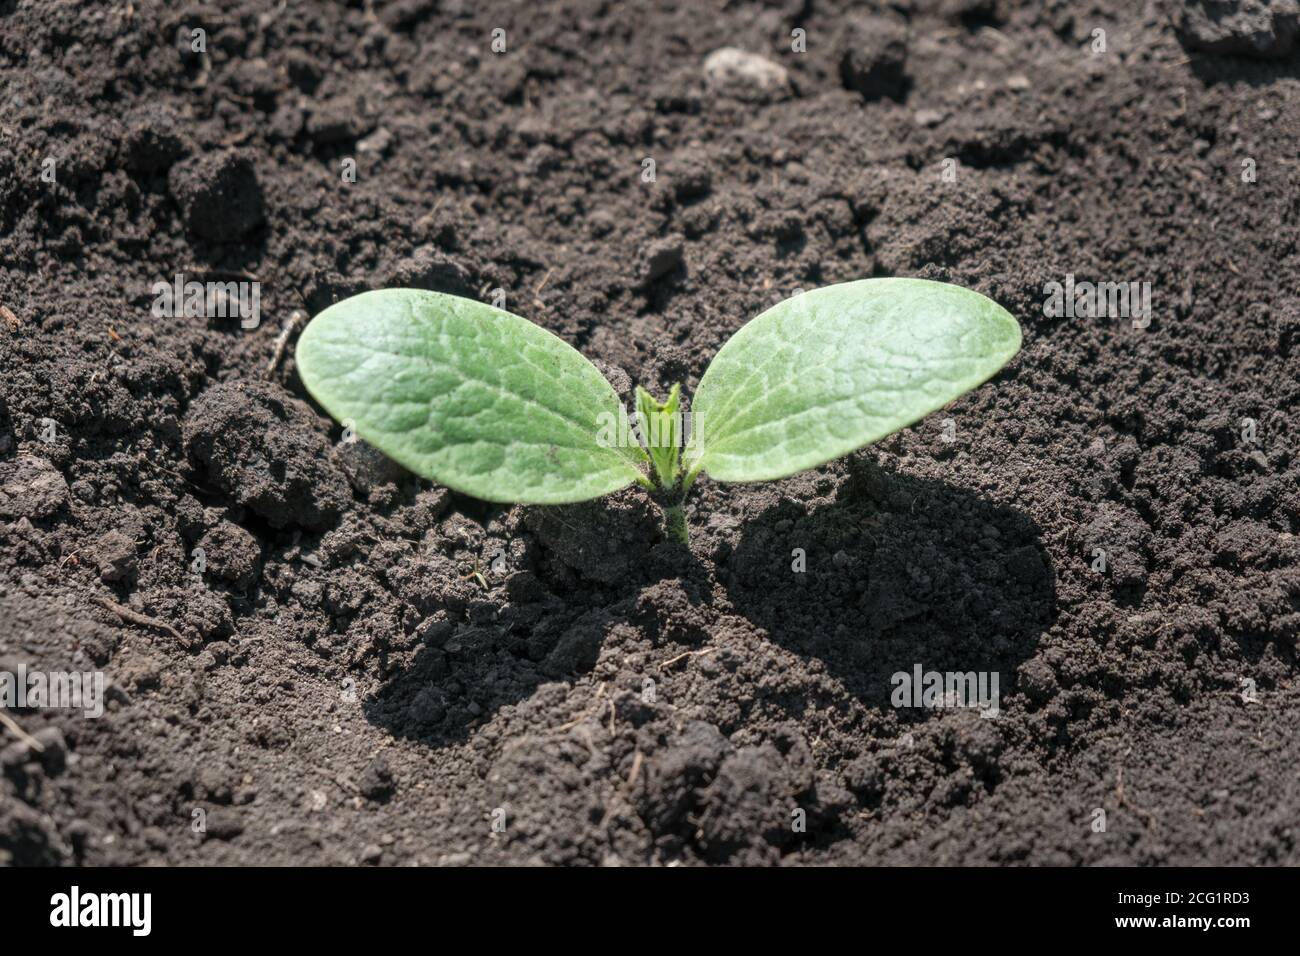 Cotyledons of a white vegetable marrow hatch out of the ground in a garden in a vegetable garden. Stock Photo